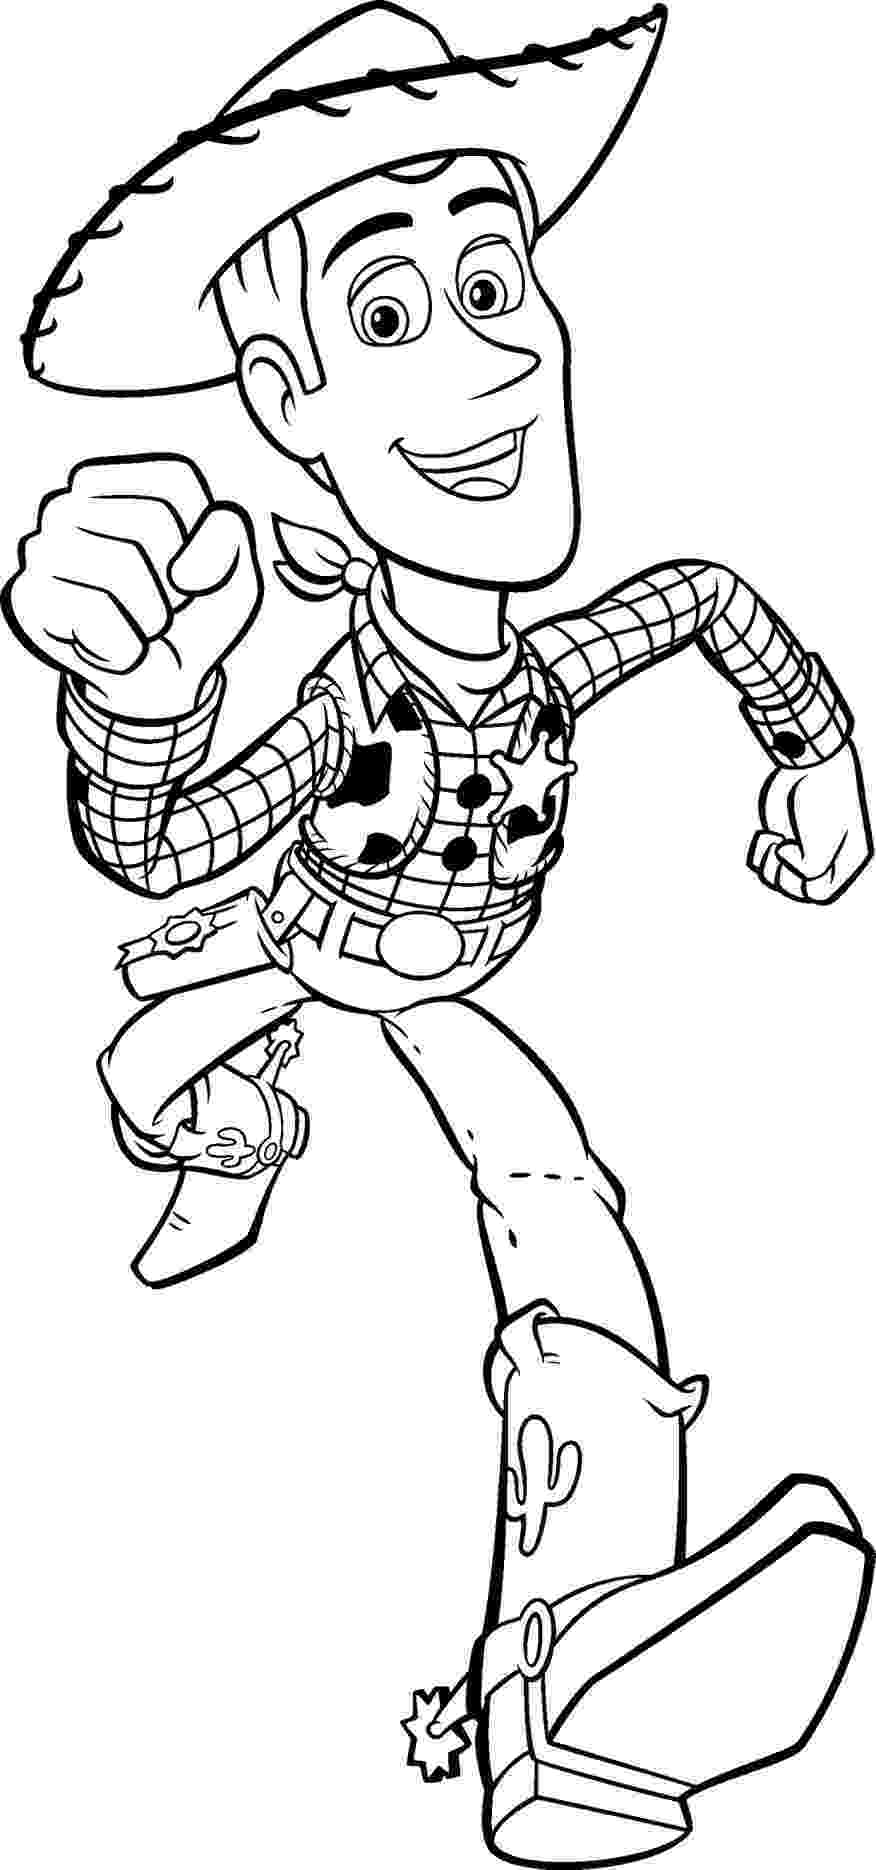 toy story 2 pictures to colour free printable coloring pages toy story to print pictures colour toy to 2 story 